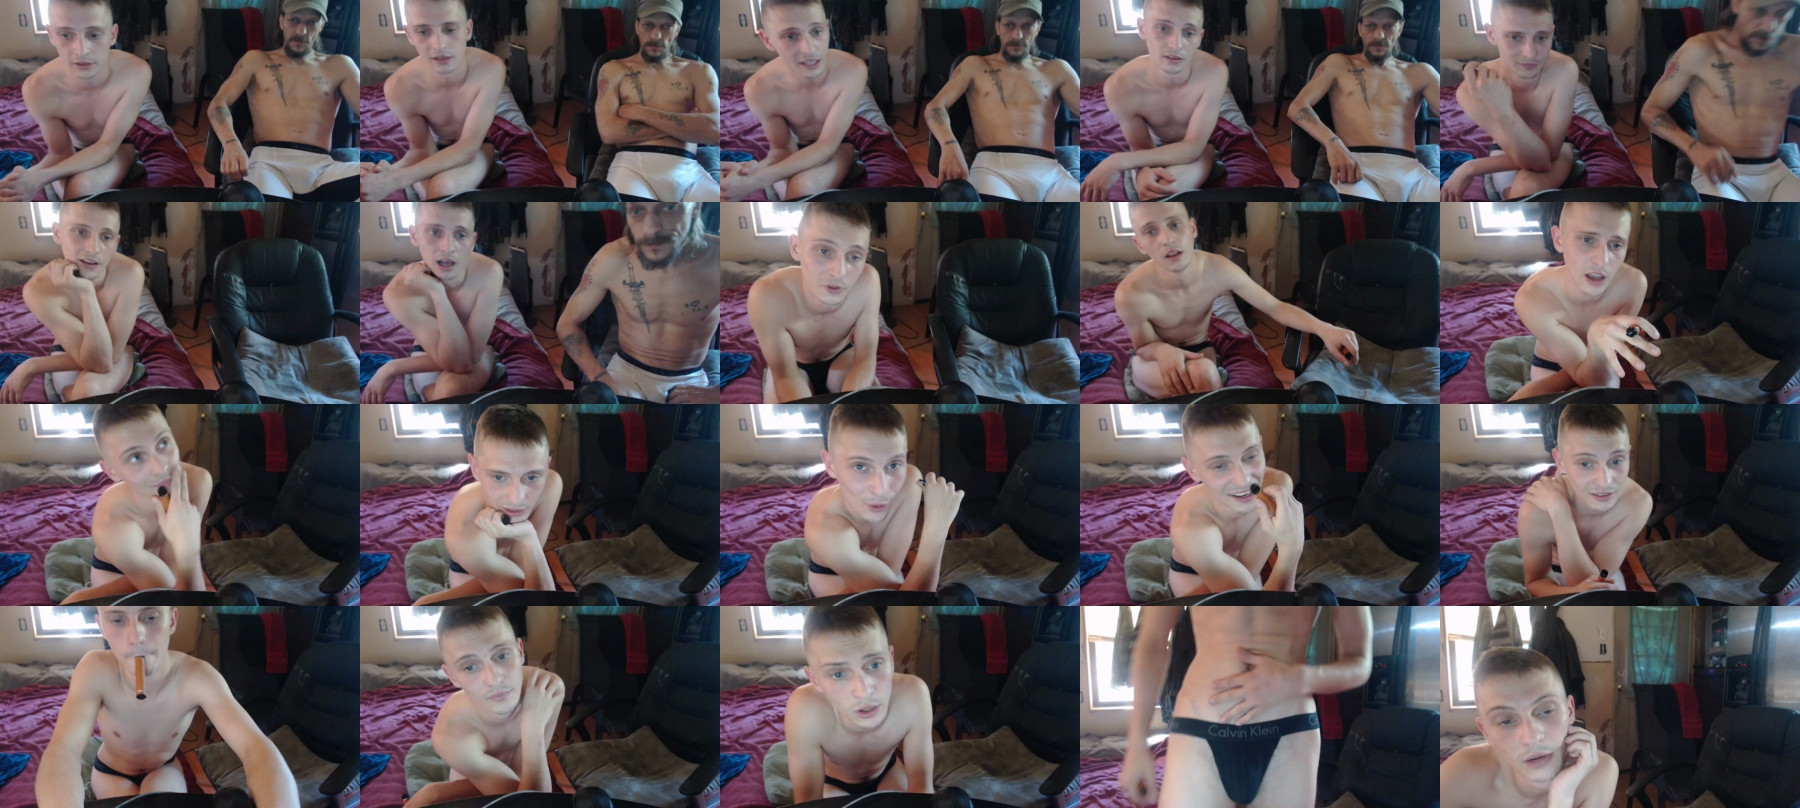 Jay_Short7863  24-04-2021 Male Topless